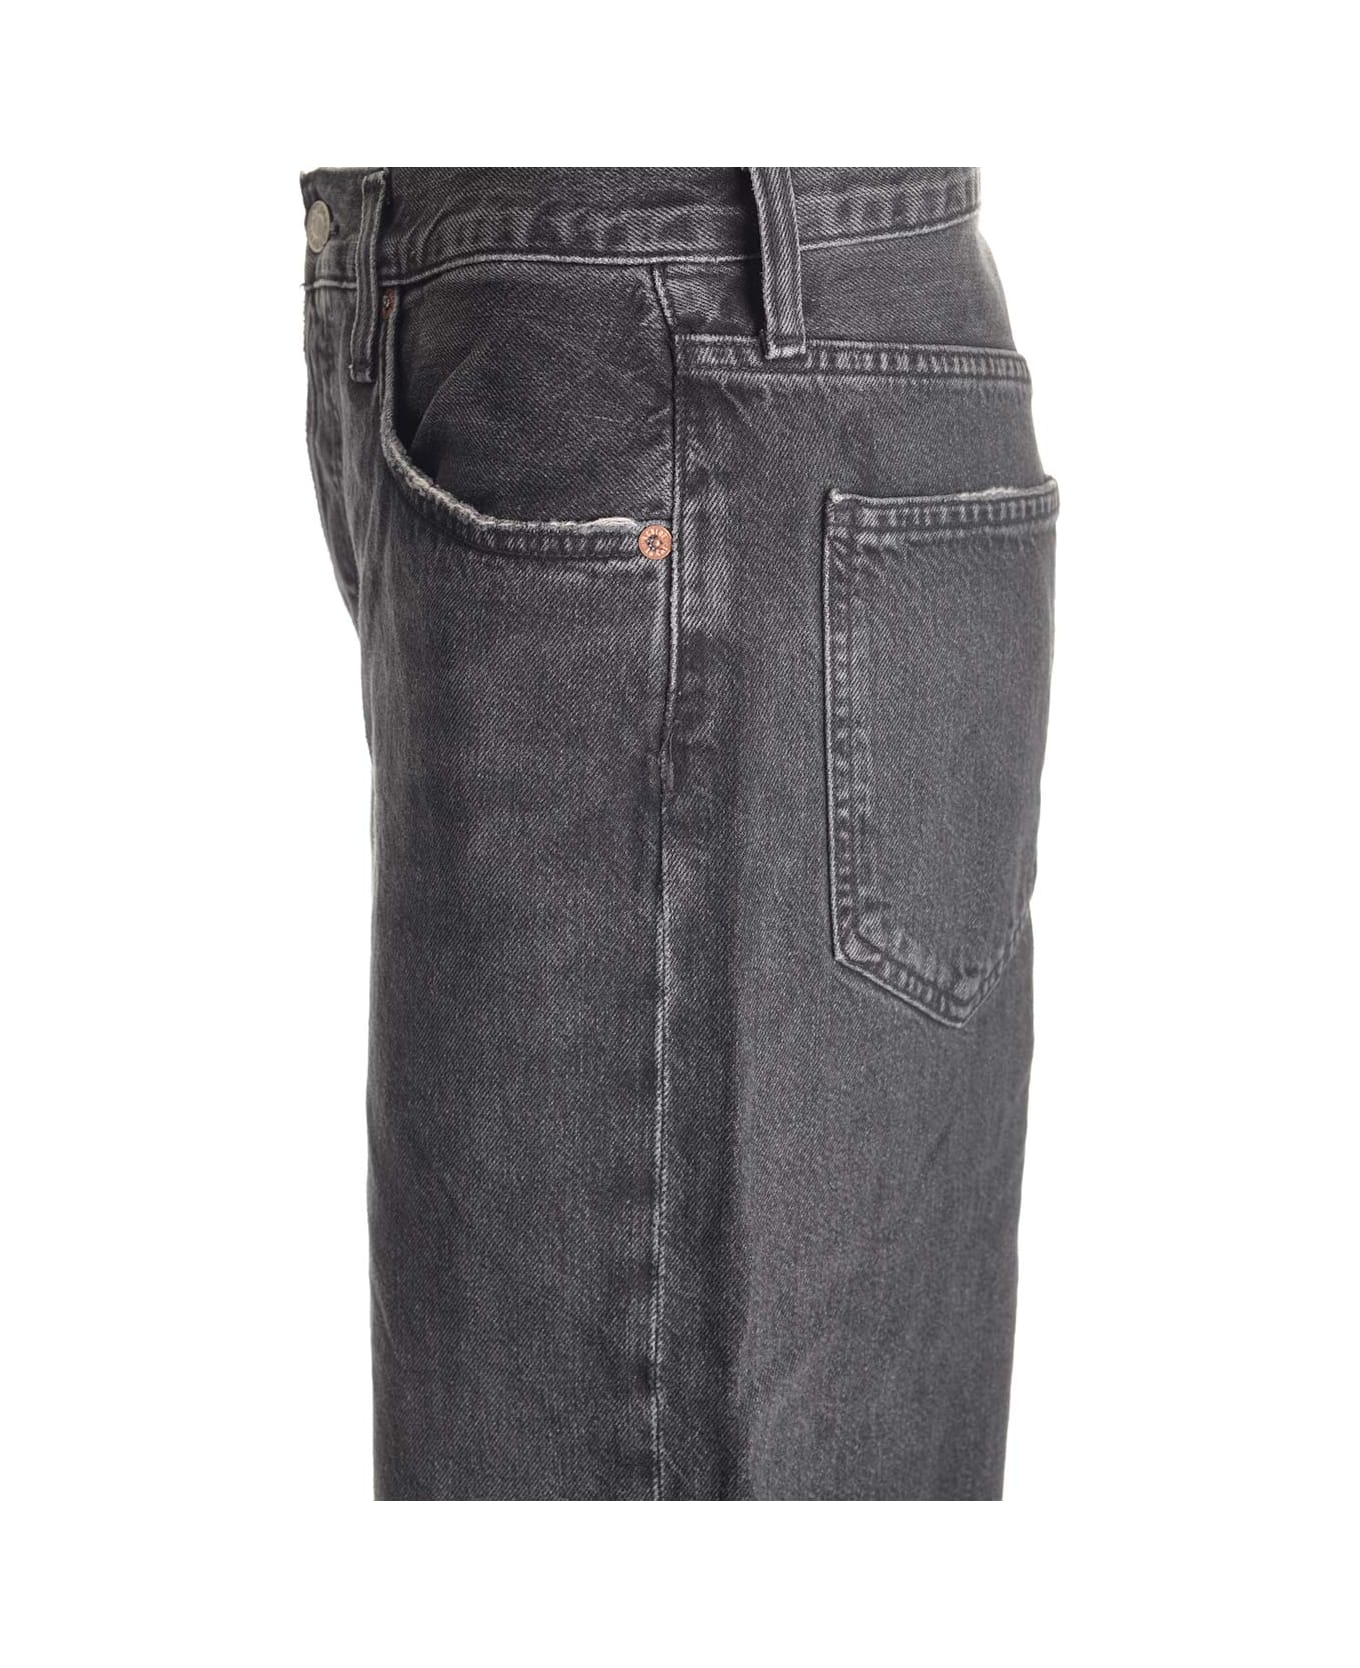 AGOLDE Faded Black Baggy Jeans - Parax Paradox